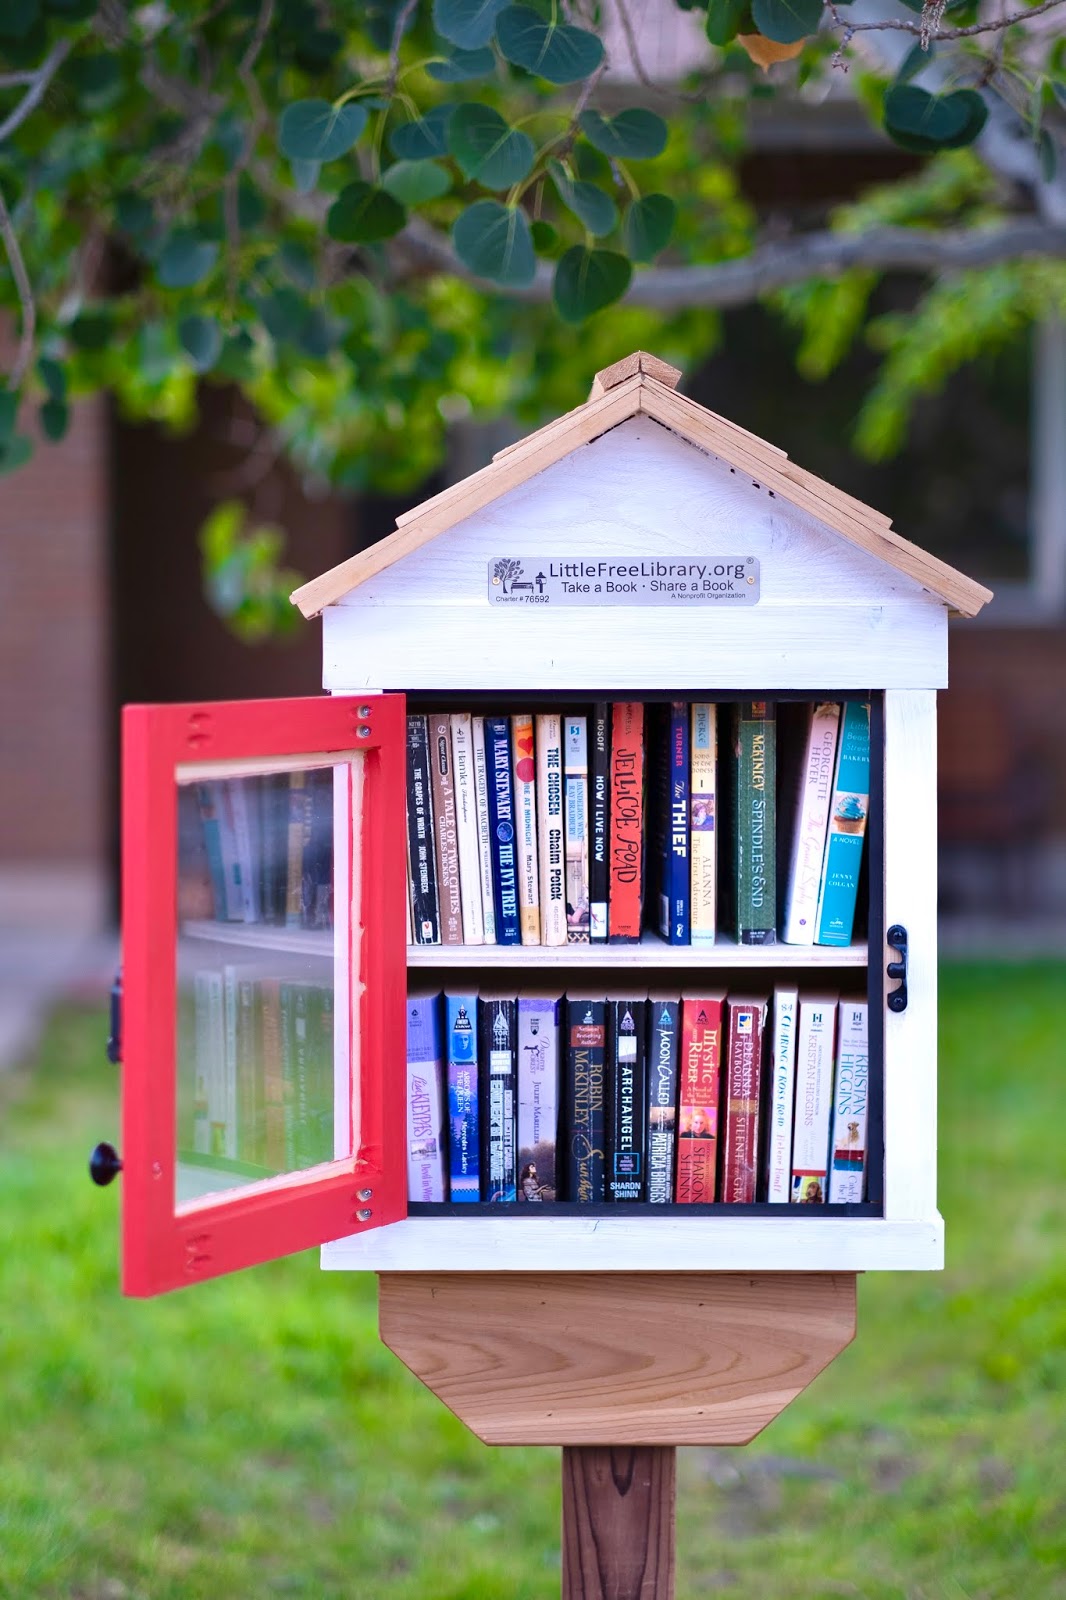 Angie's Little Free Library